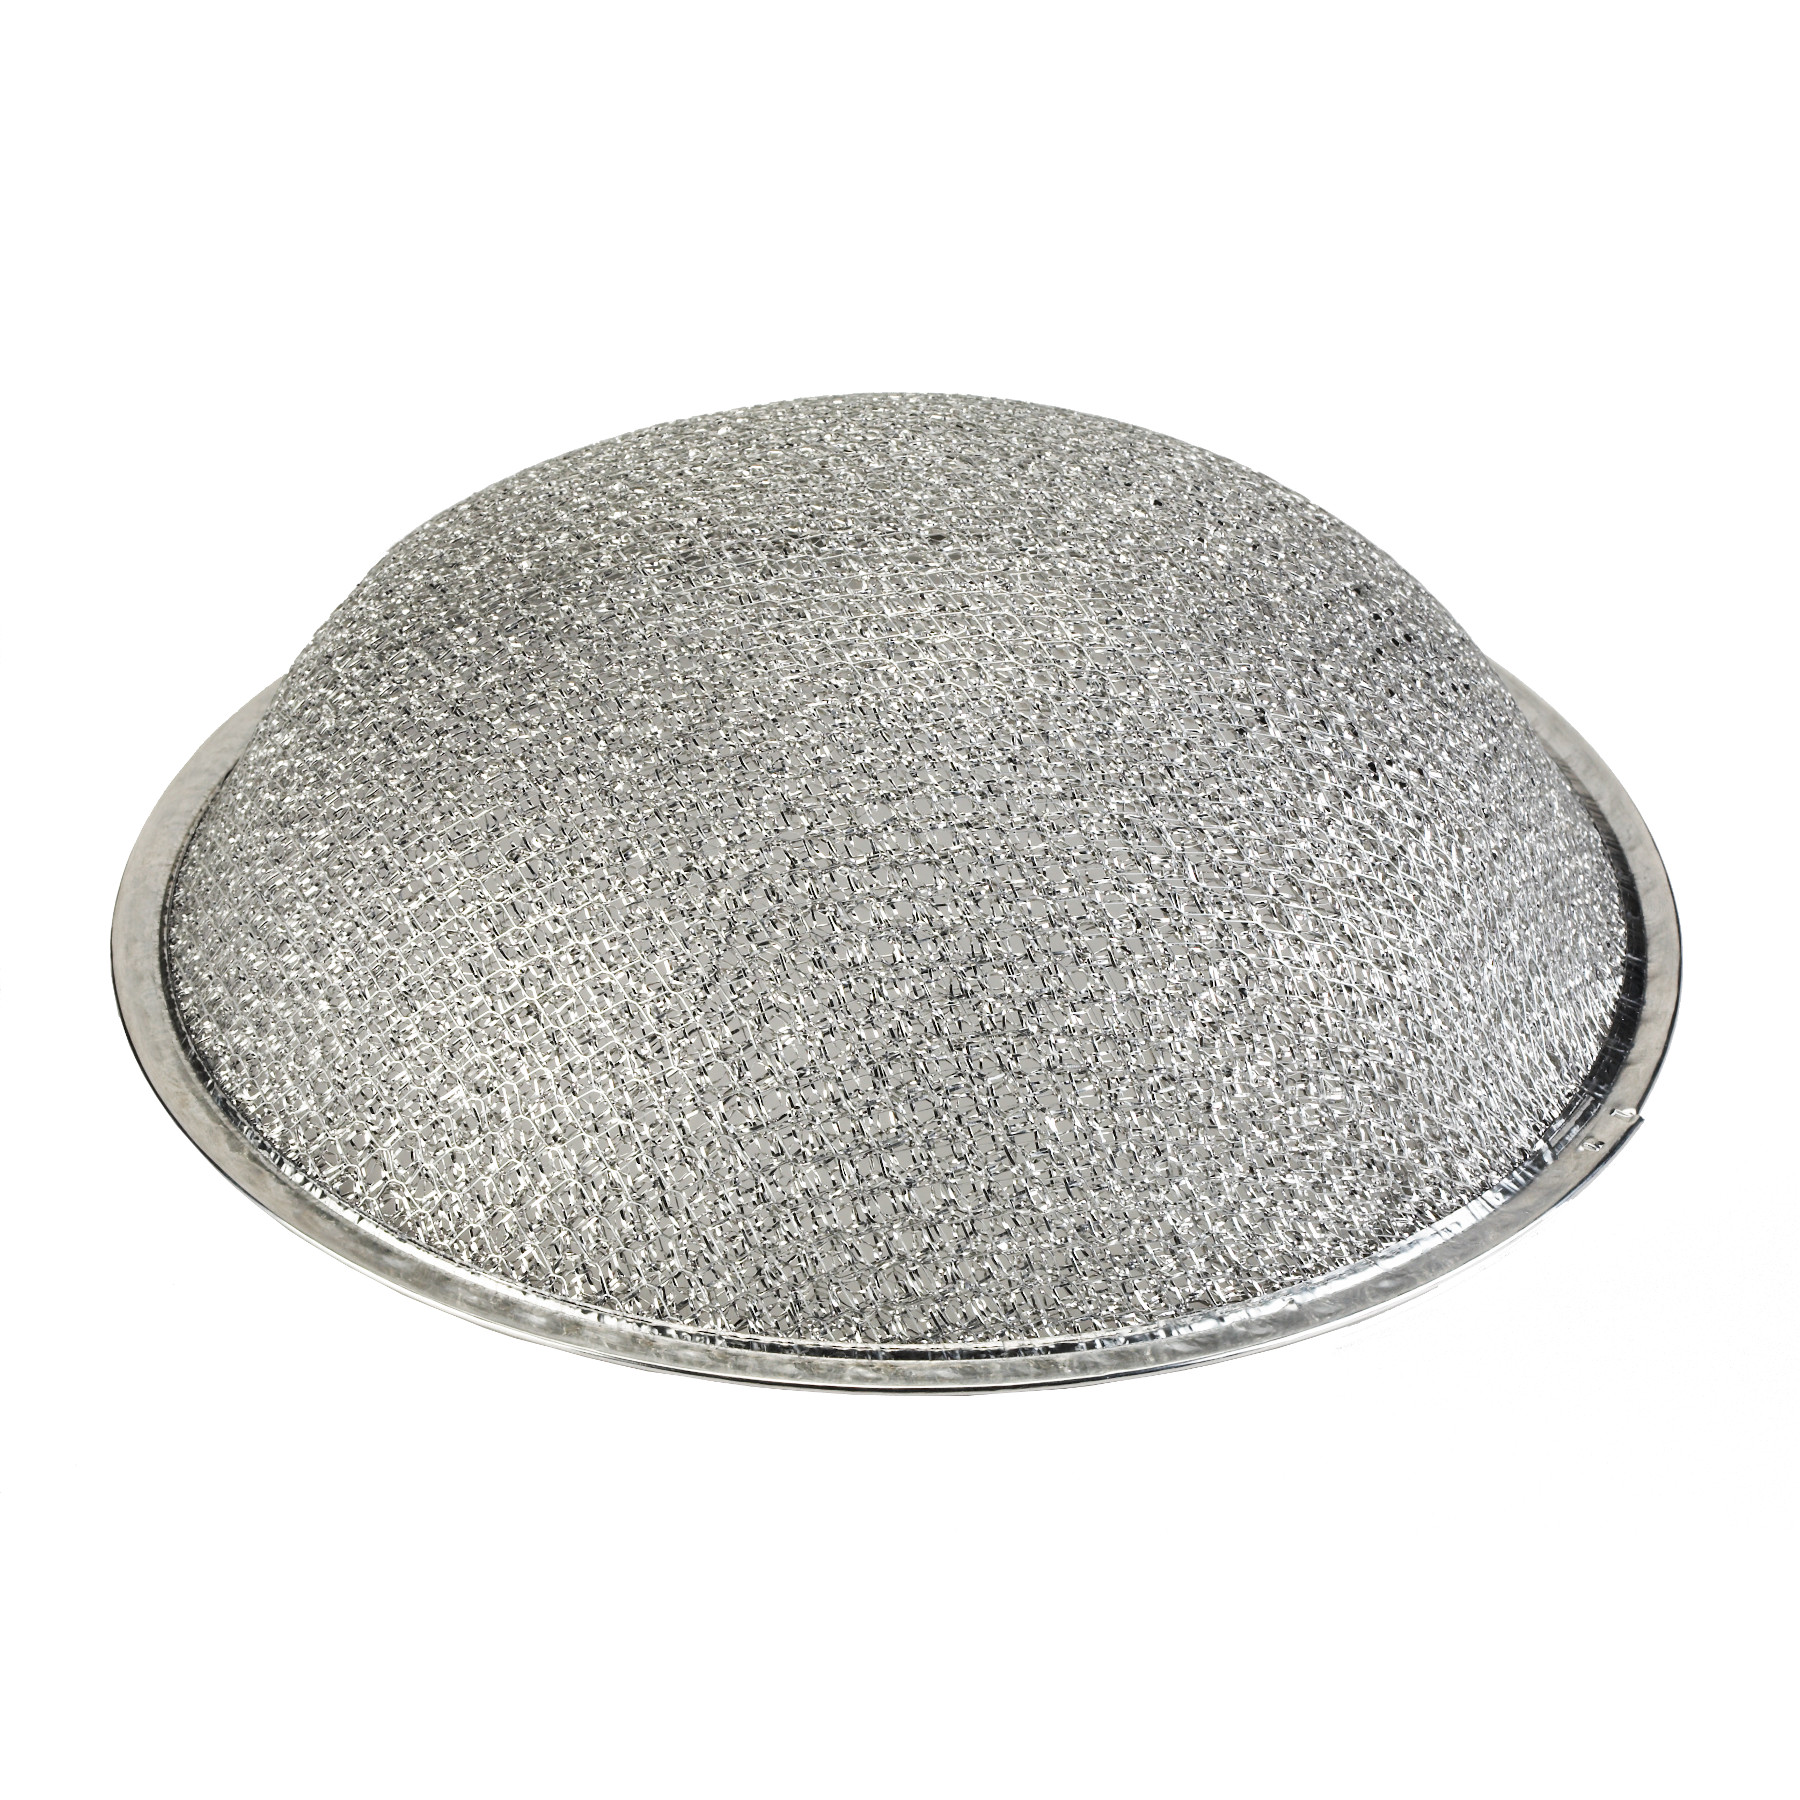 Round Aluminum Grease Filter, 10-1/2-Inch x 3/32-Inch Thickness with 3-1/4-Inch Dome